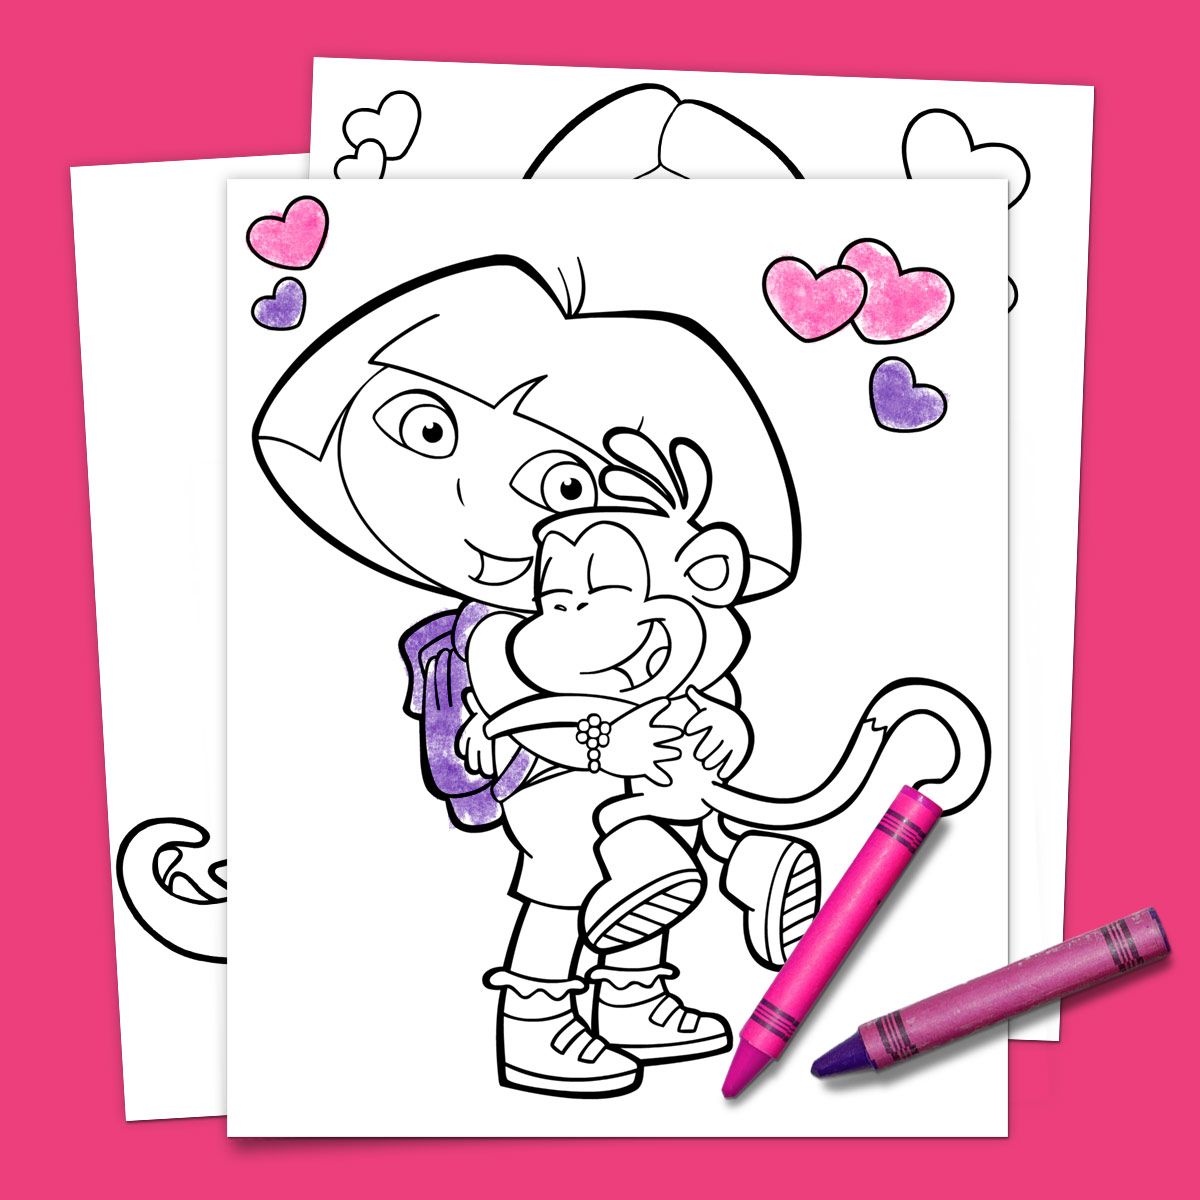 dora and friends coloring pages